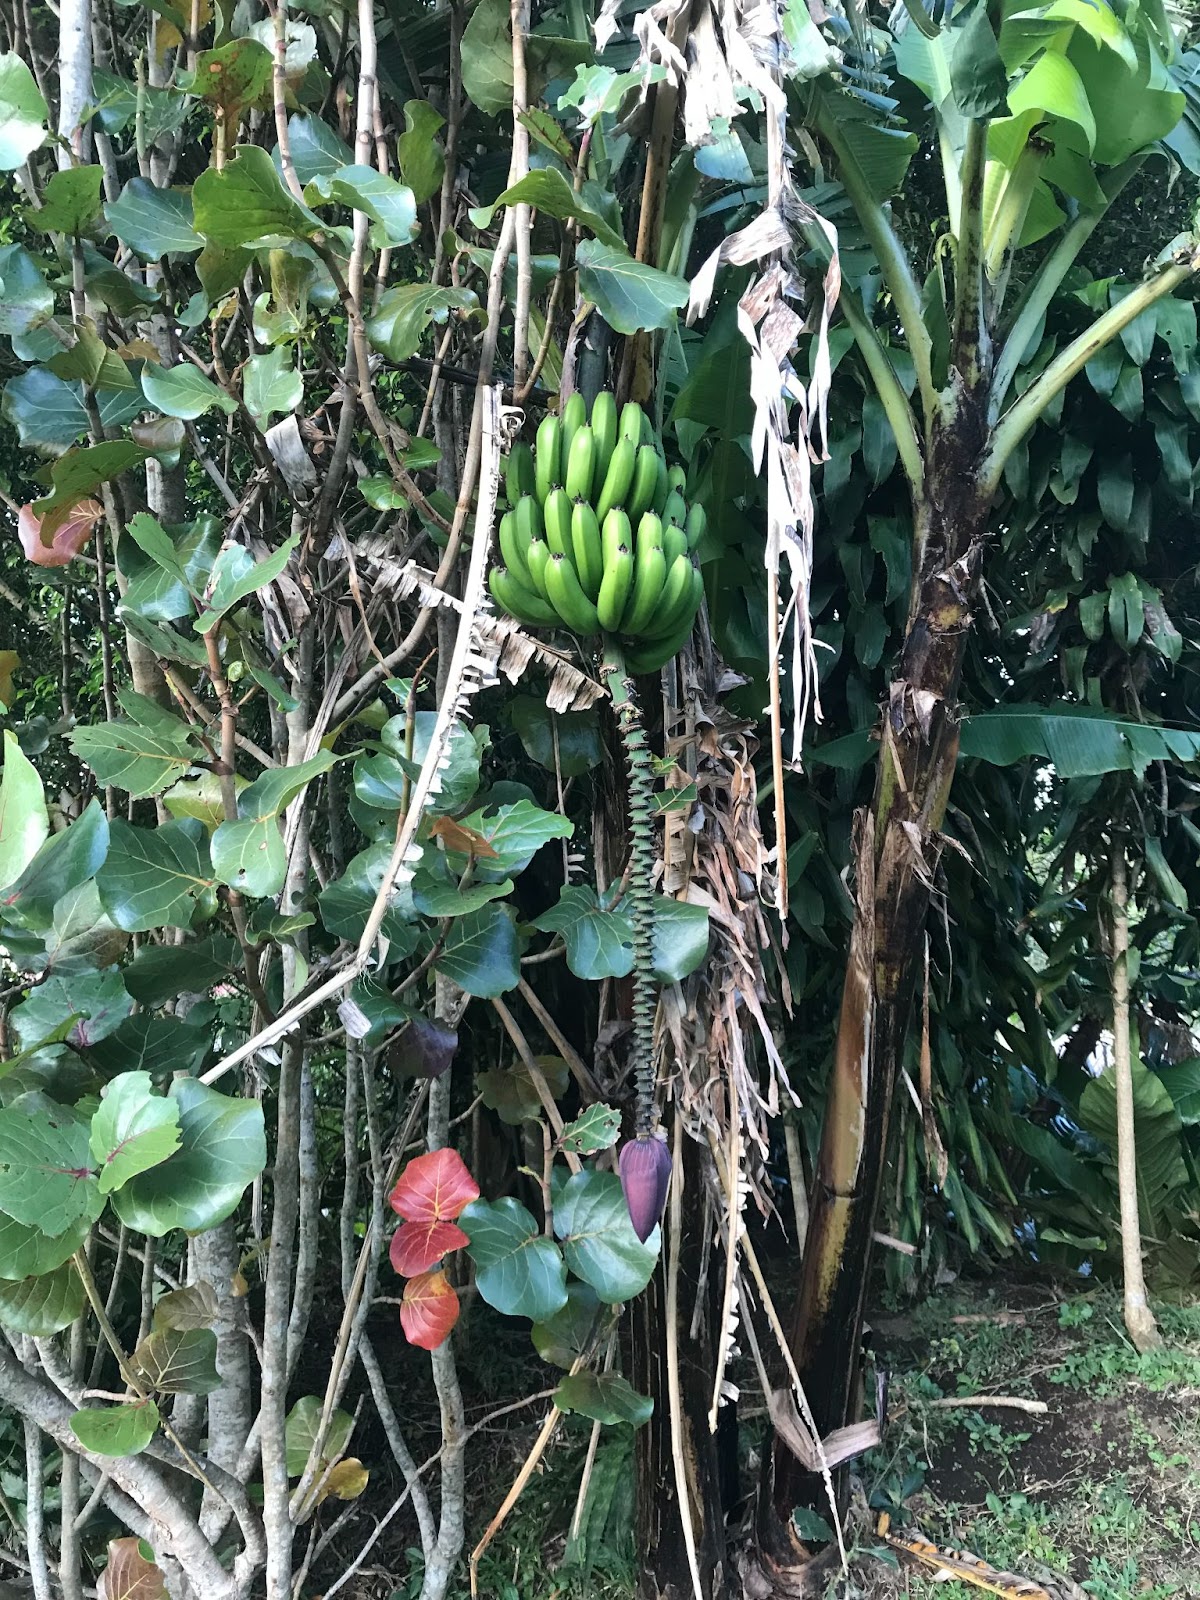 Plantains in the forest, Monteverde, Costa Rica